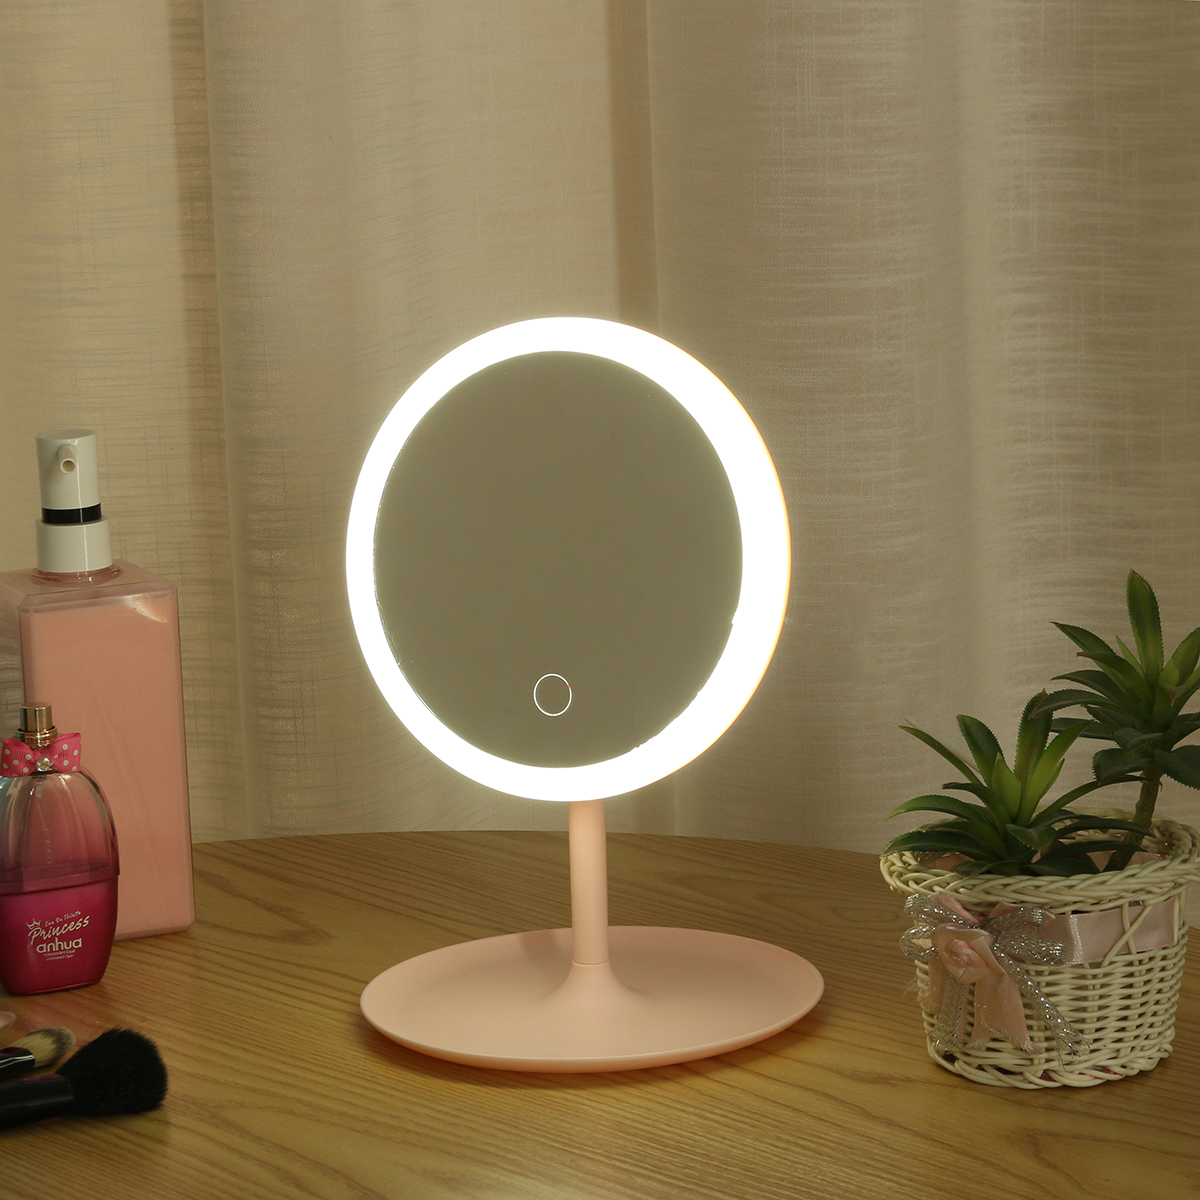 

2 in 1 LED Makeup Mirror Light Lamp Rechargeable Brightness Adjustable HD Makeup Daylight Cosmetics Mirror